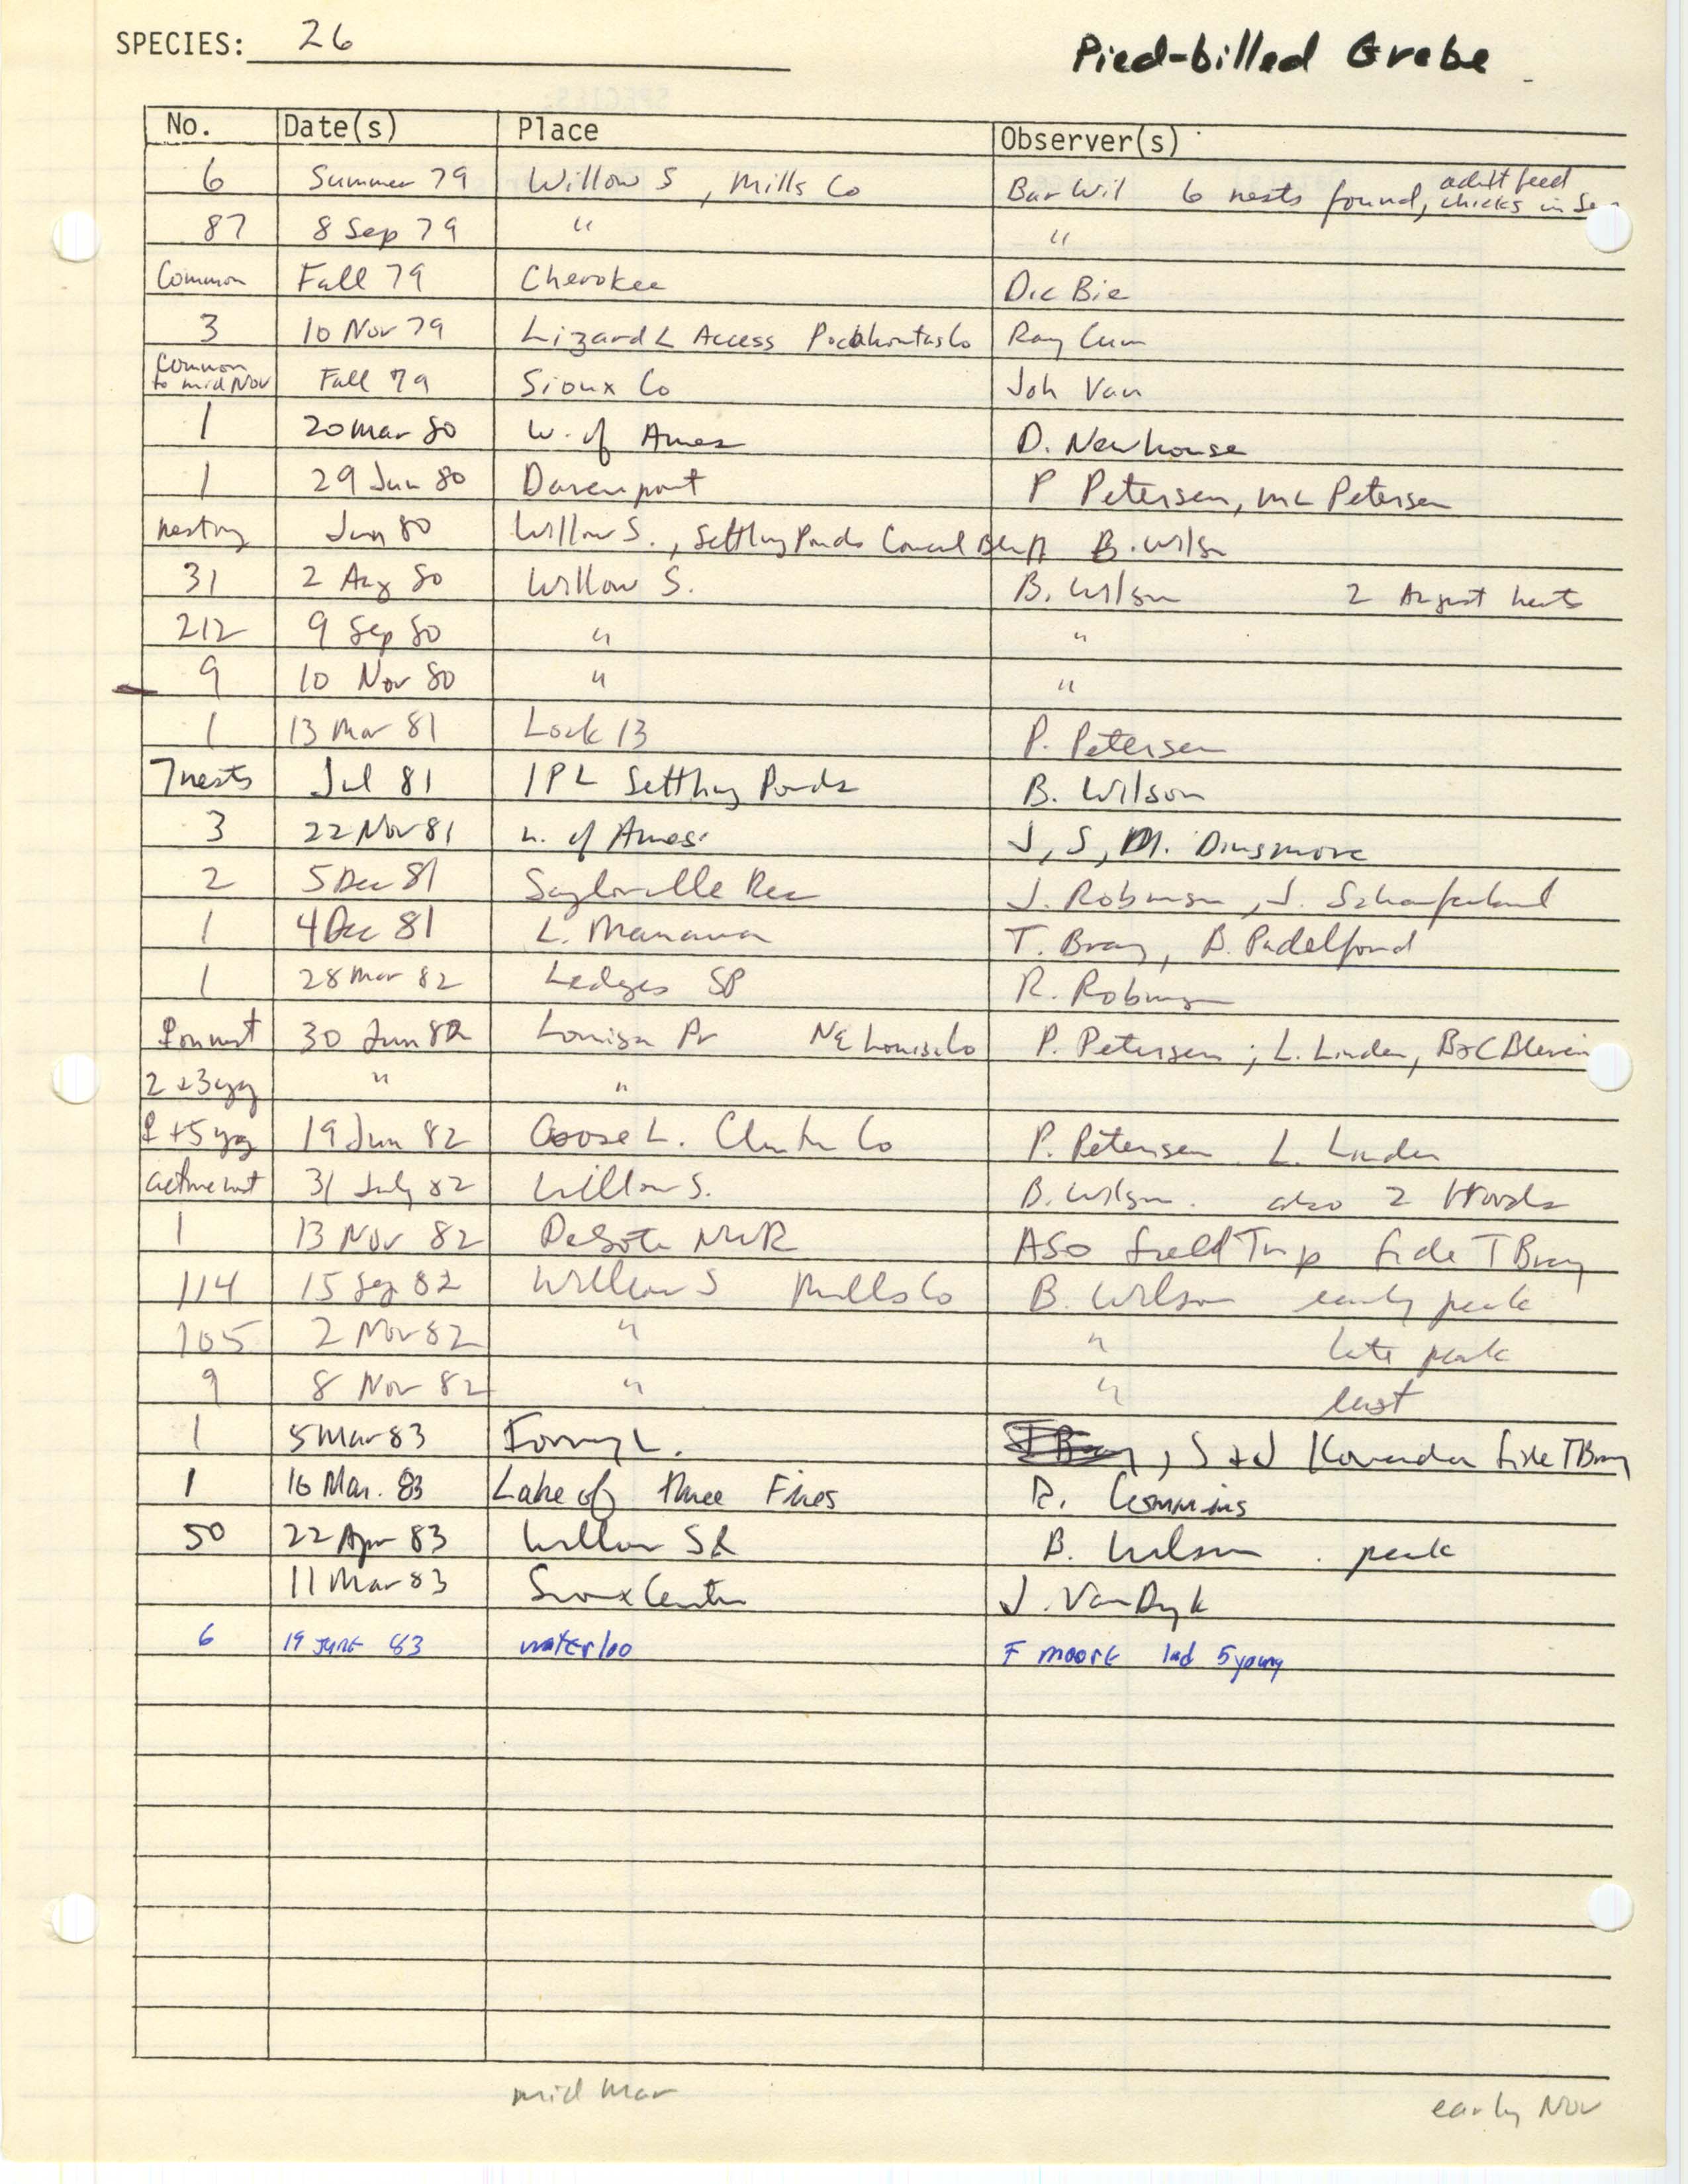 Iowa Ornithologists' Union, field report compiled data, Pied-billed Grebe, 1979-1983